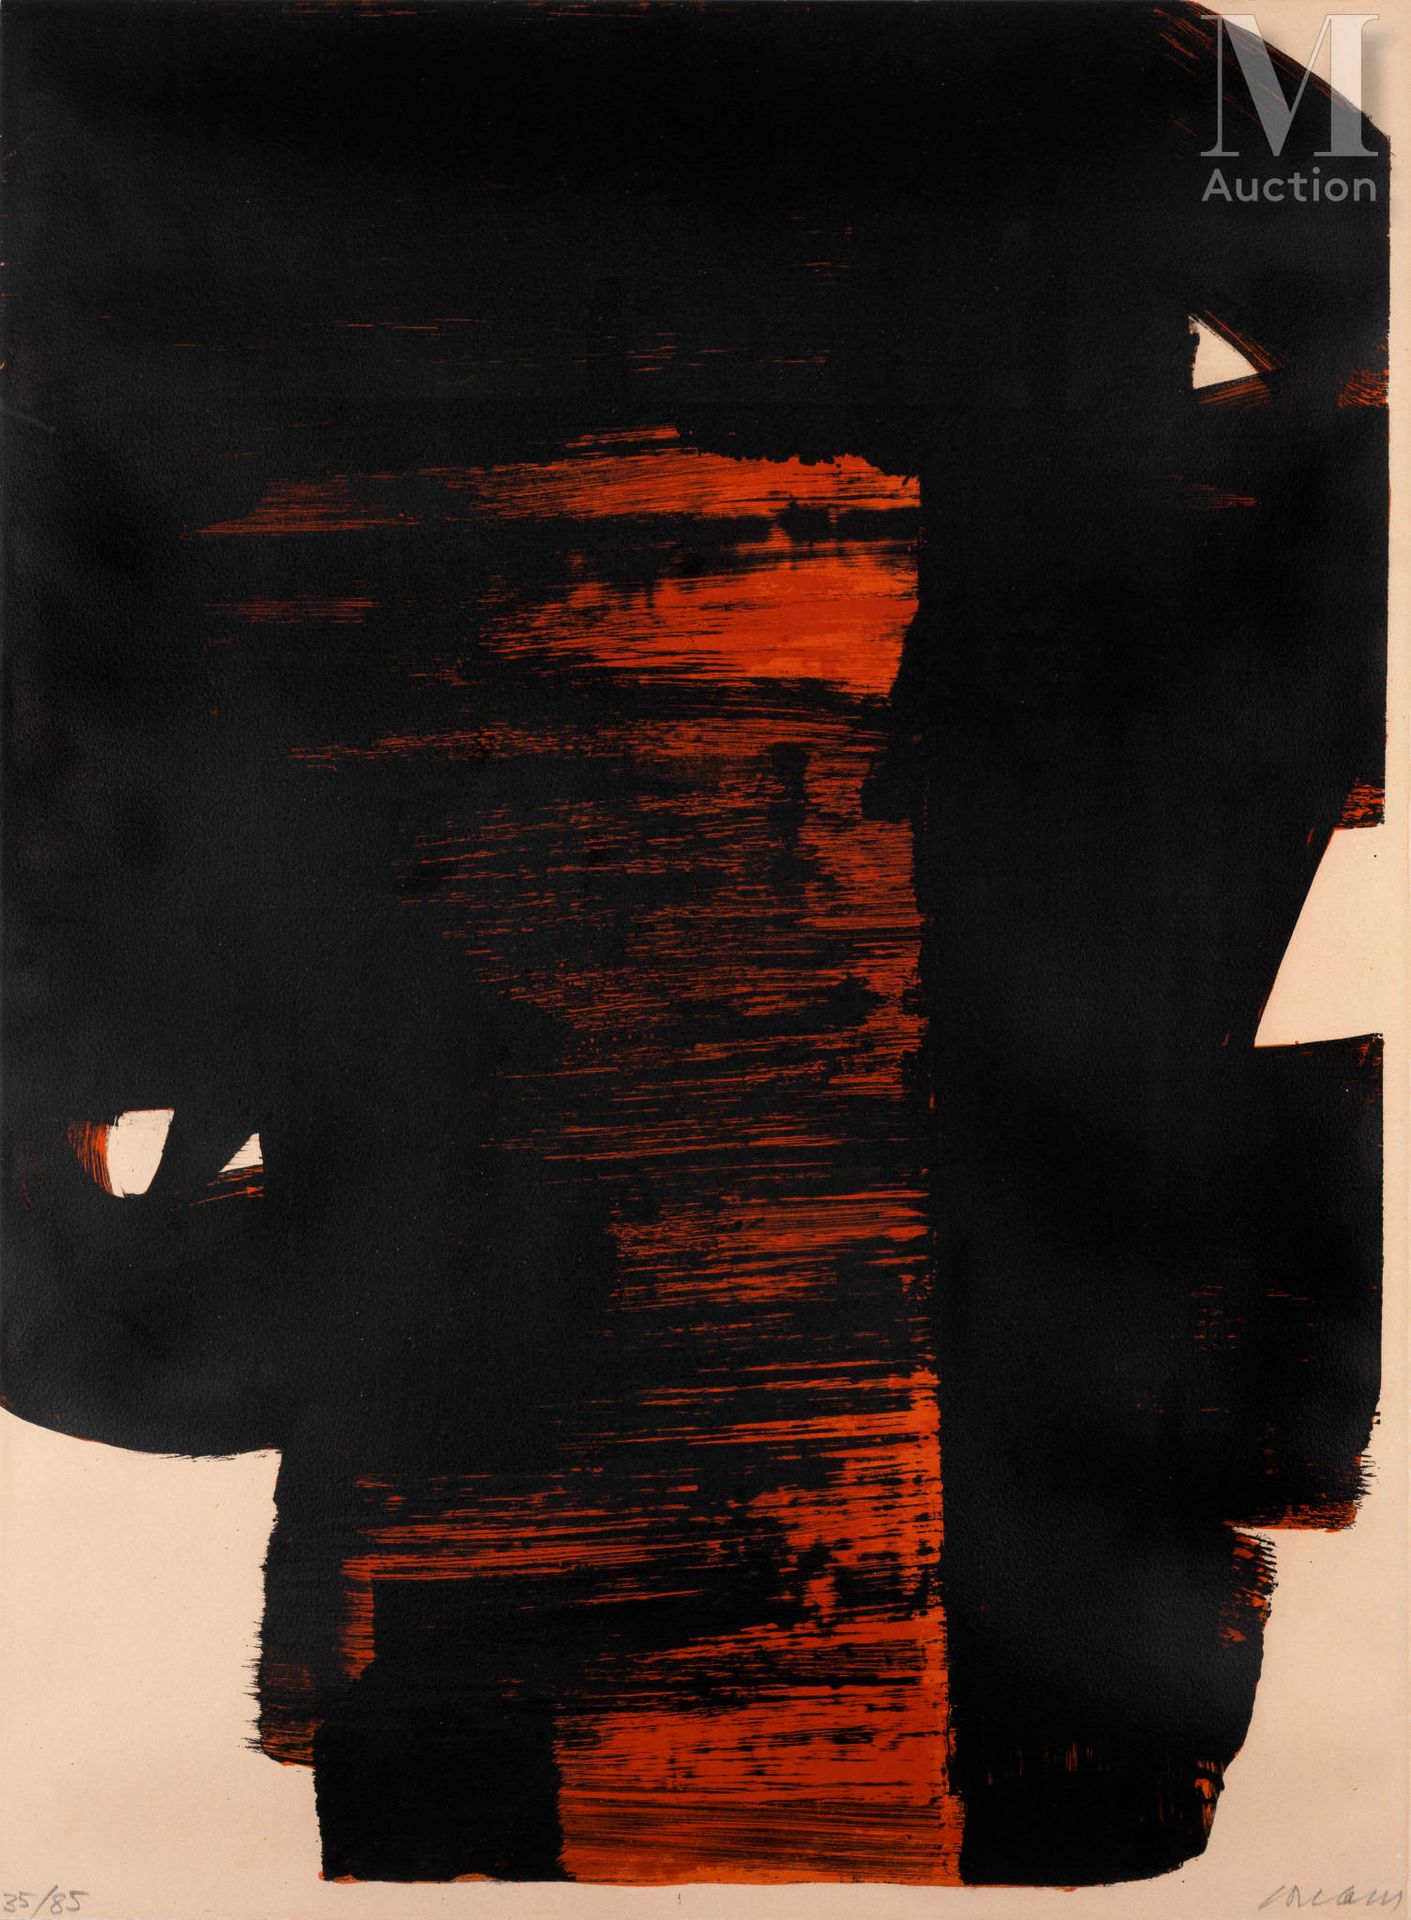 Pierre SOULAGES (1919 - 2022) Lithograph n°26, 1969

Lithograph on Arches vellum&hellip;